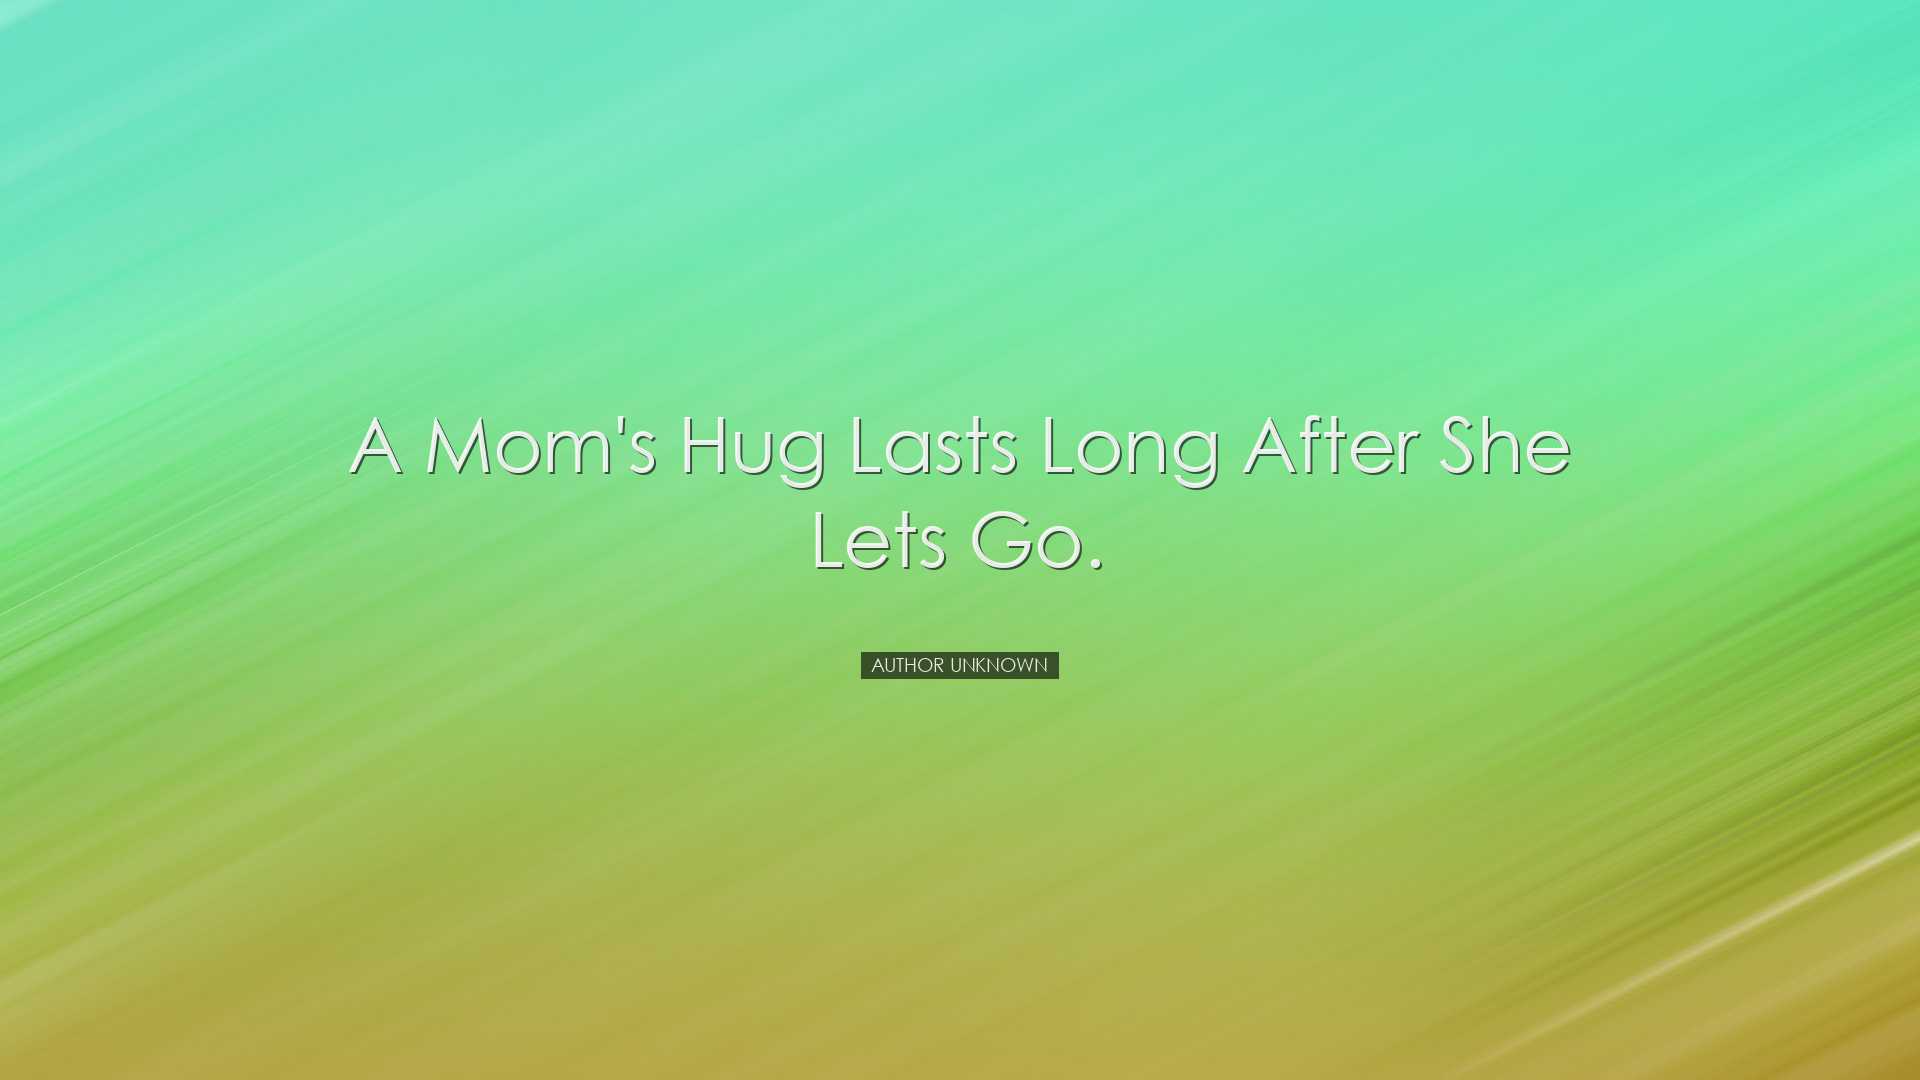 A mom's hug lasts long after she lets go. - Author Unknown